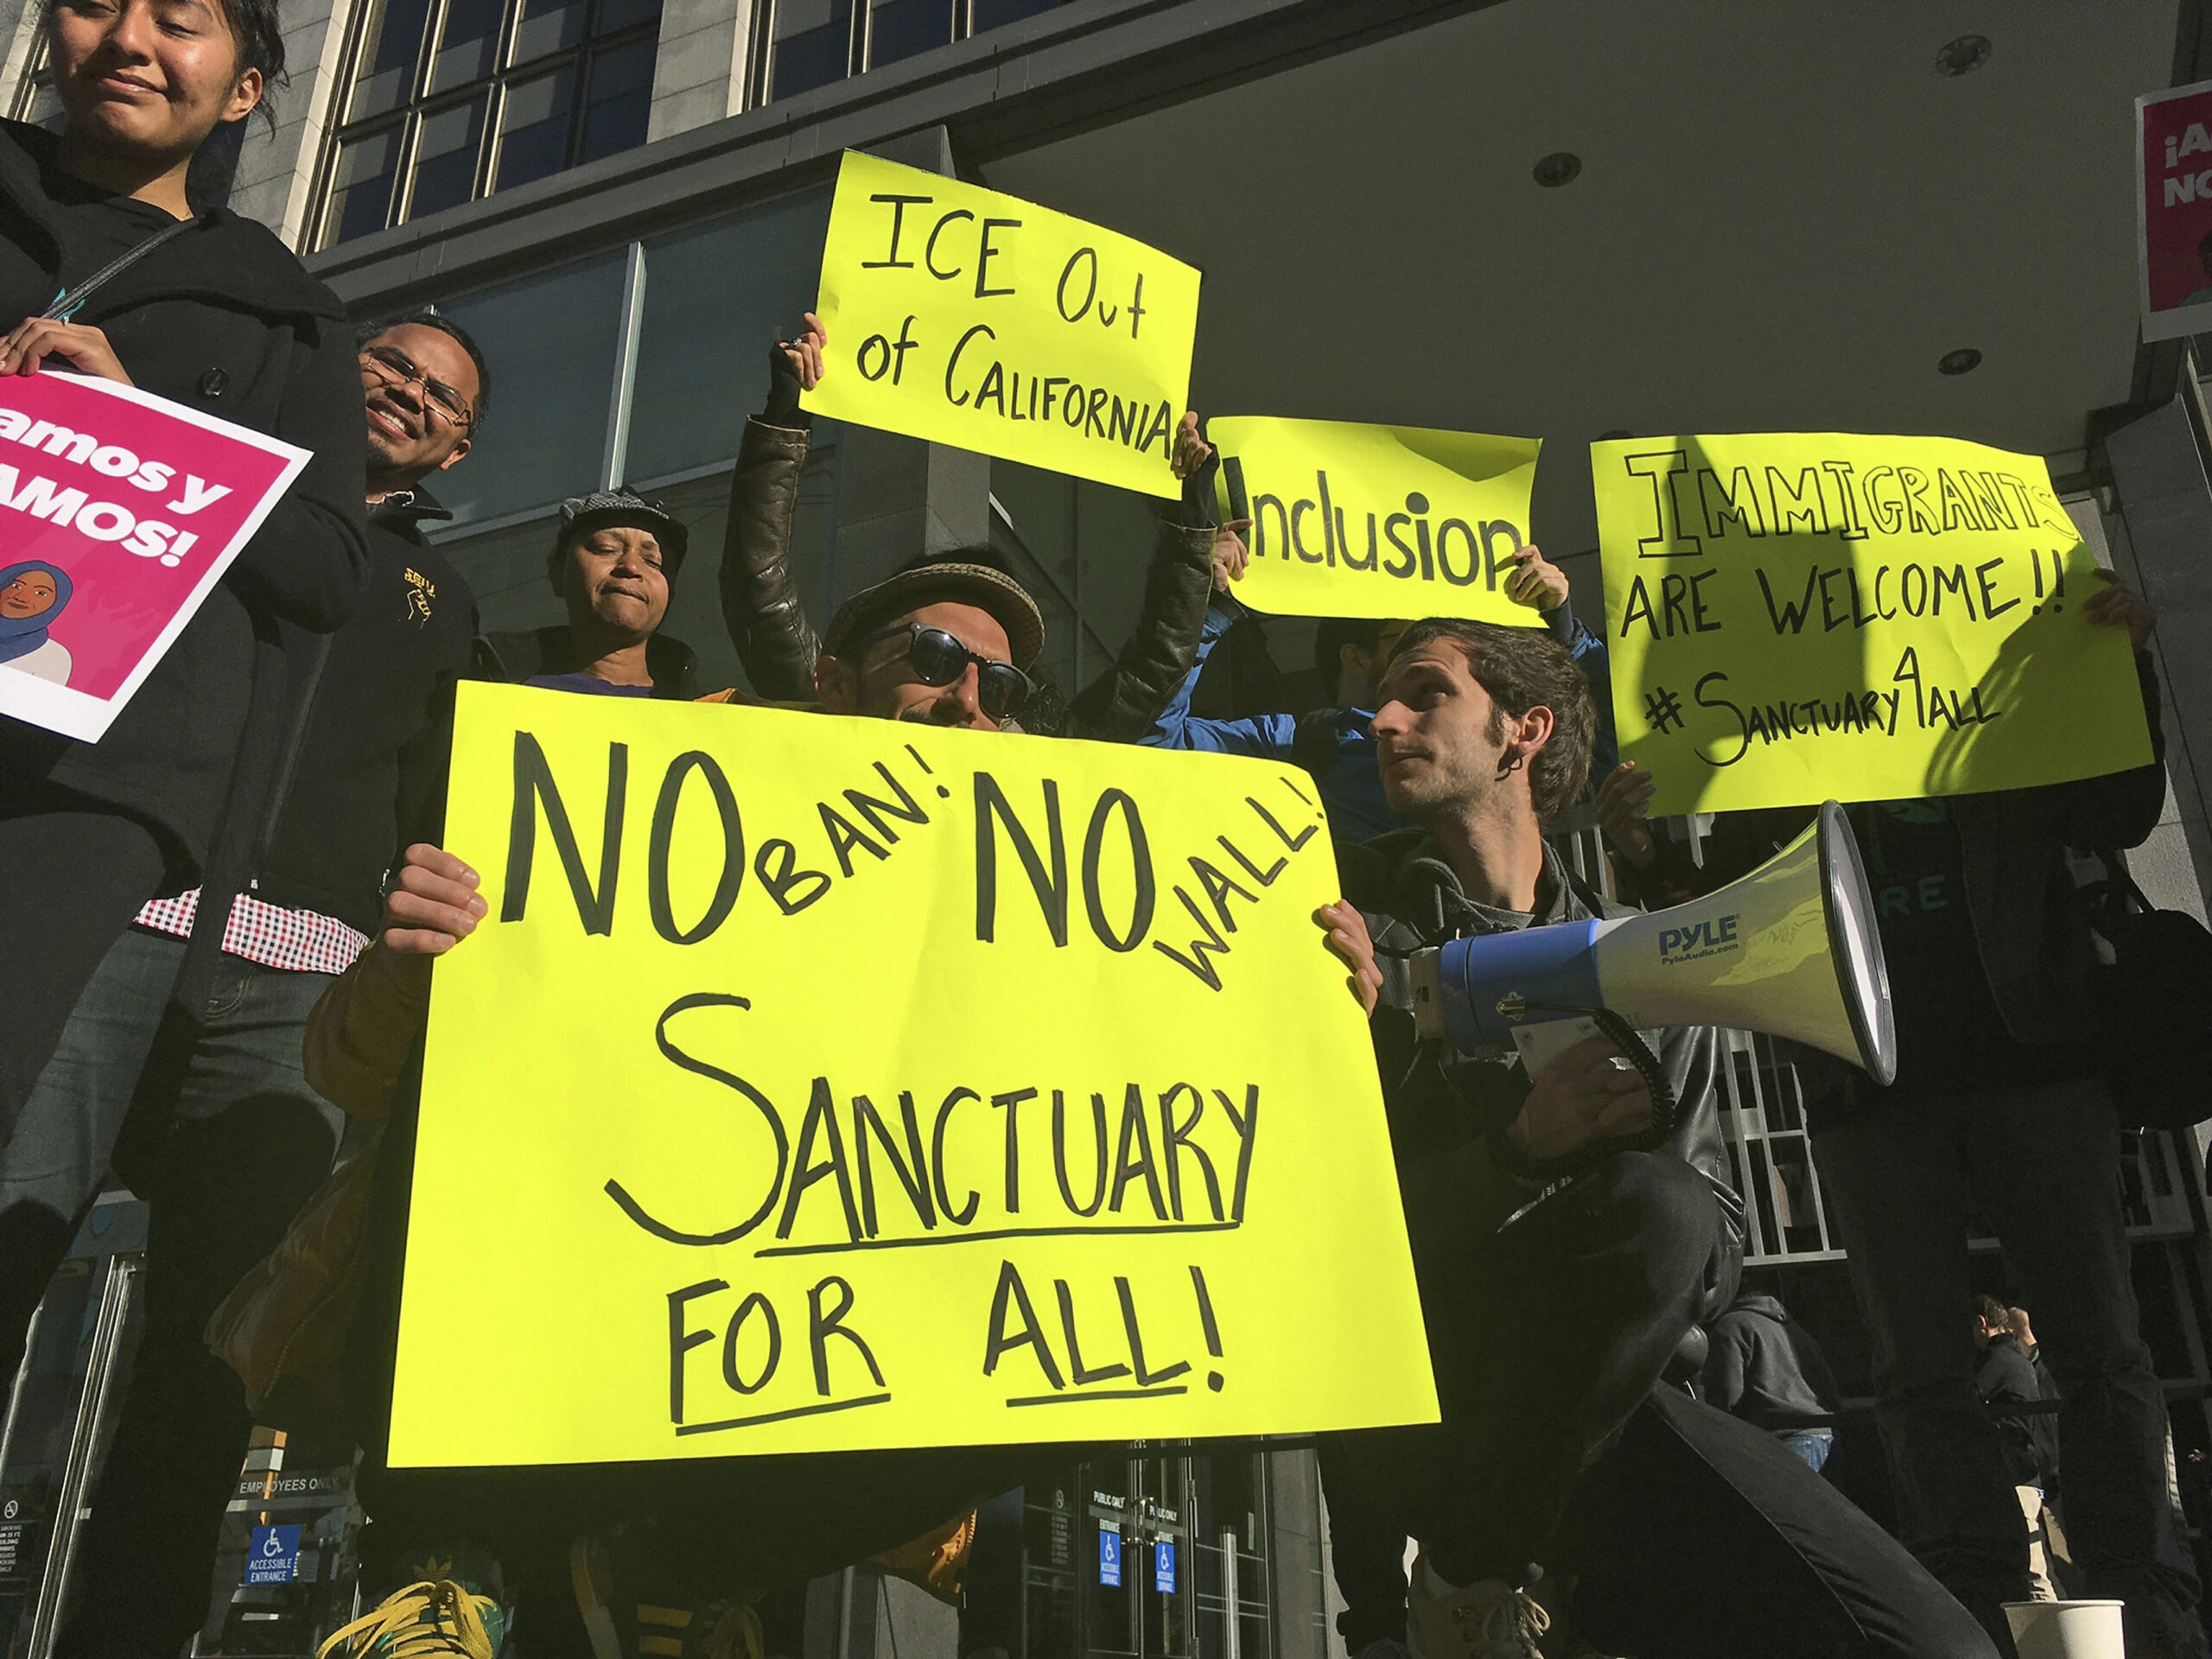 Protesters hold up bright yellow signs reading "No ban! No wall! Sanctuary for all!", "I.C.E. Out of California," and "Inclusion."